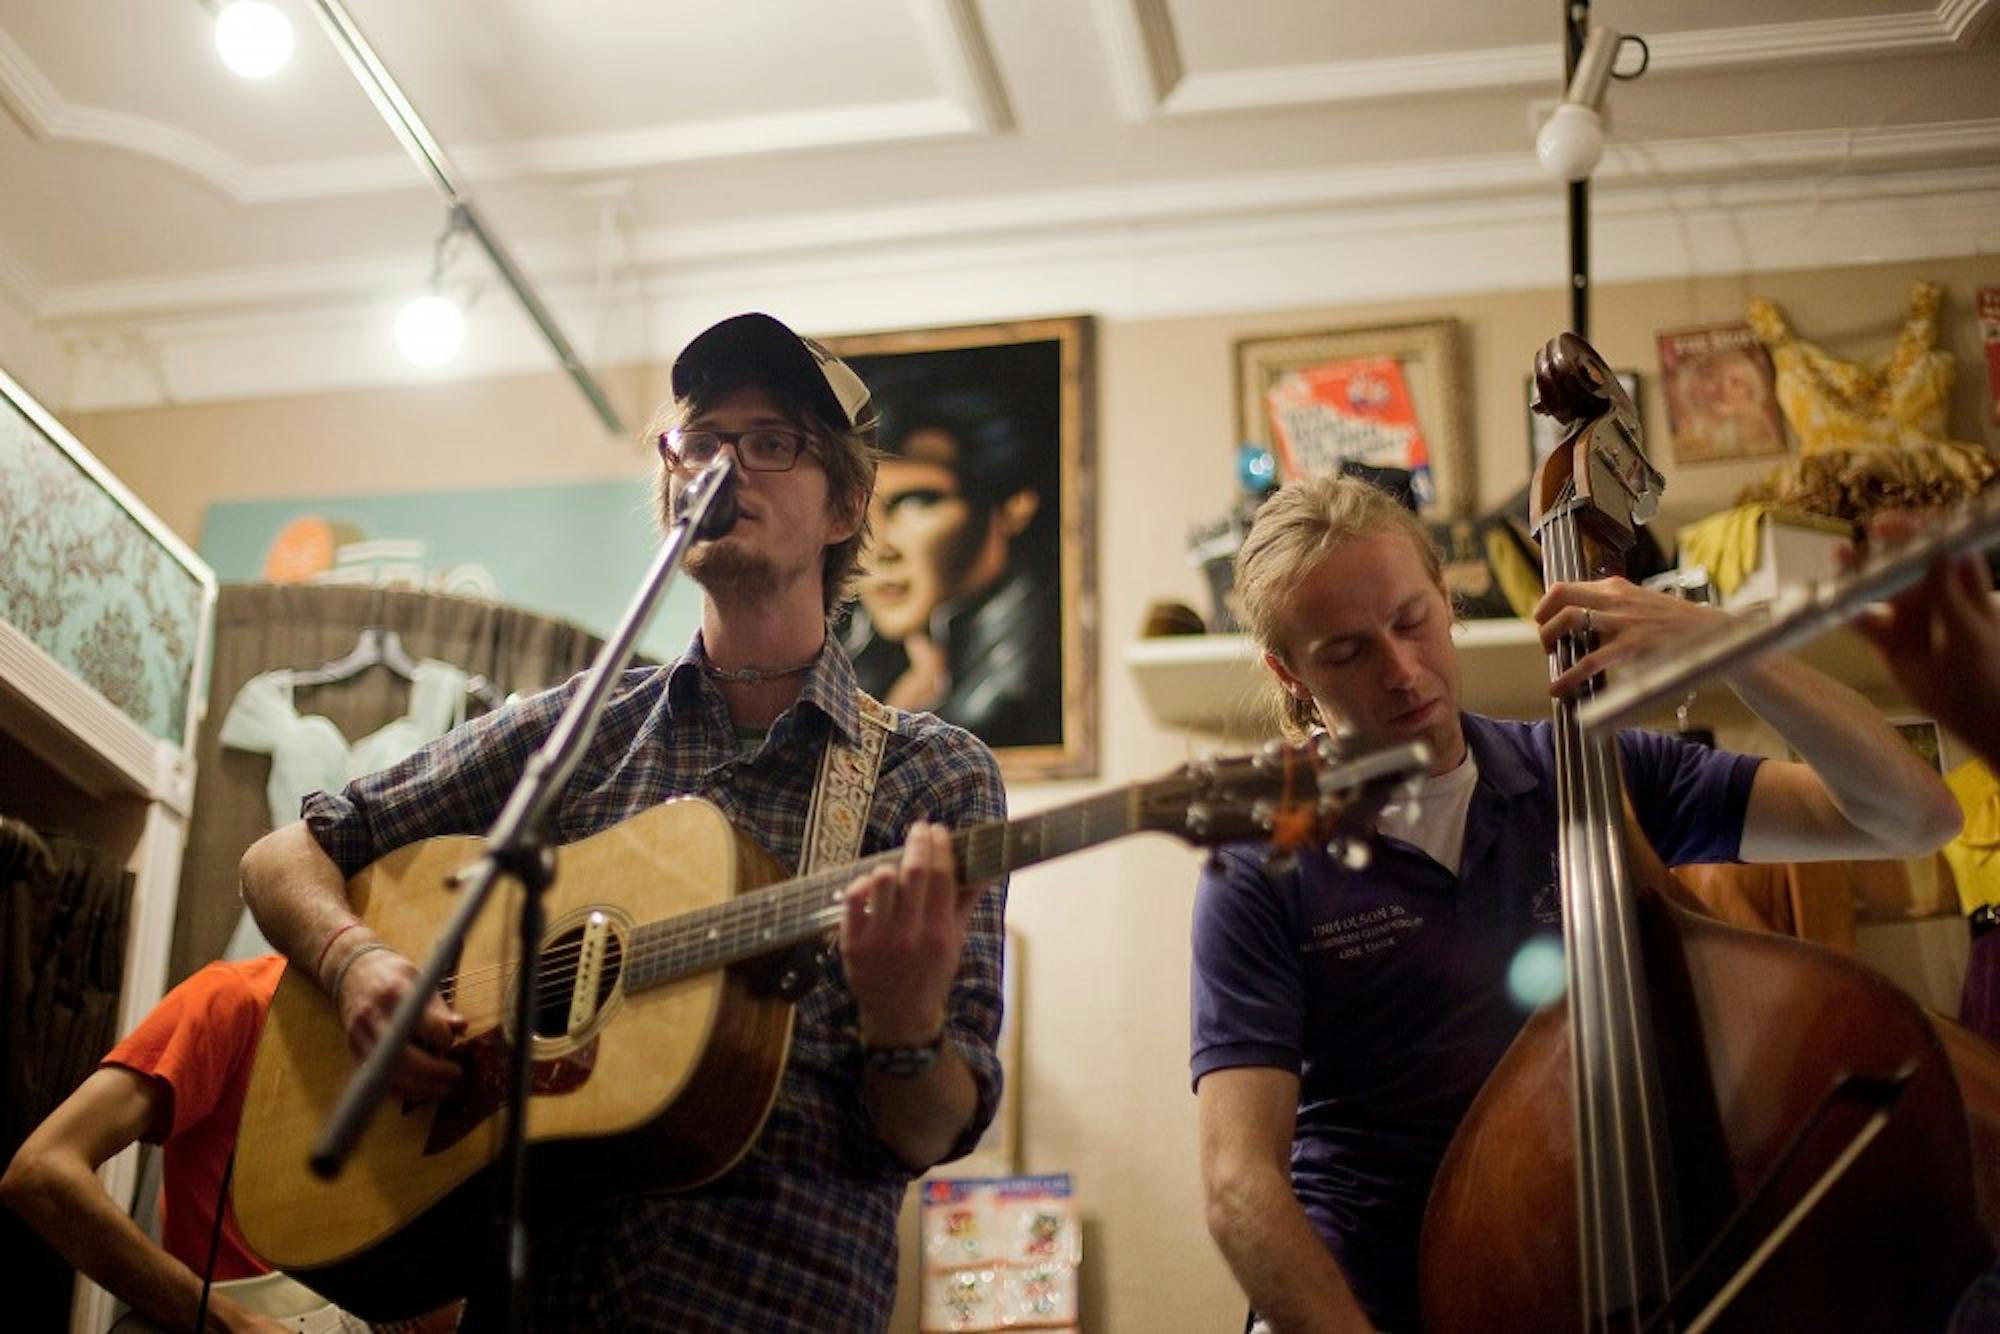 Nathan Klages (left) plays with friends at The Getup vintage clothing store in Ann Arbor on September 10, 2009.